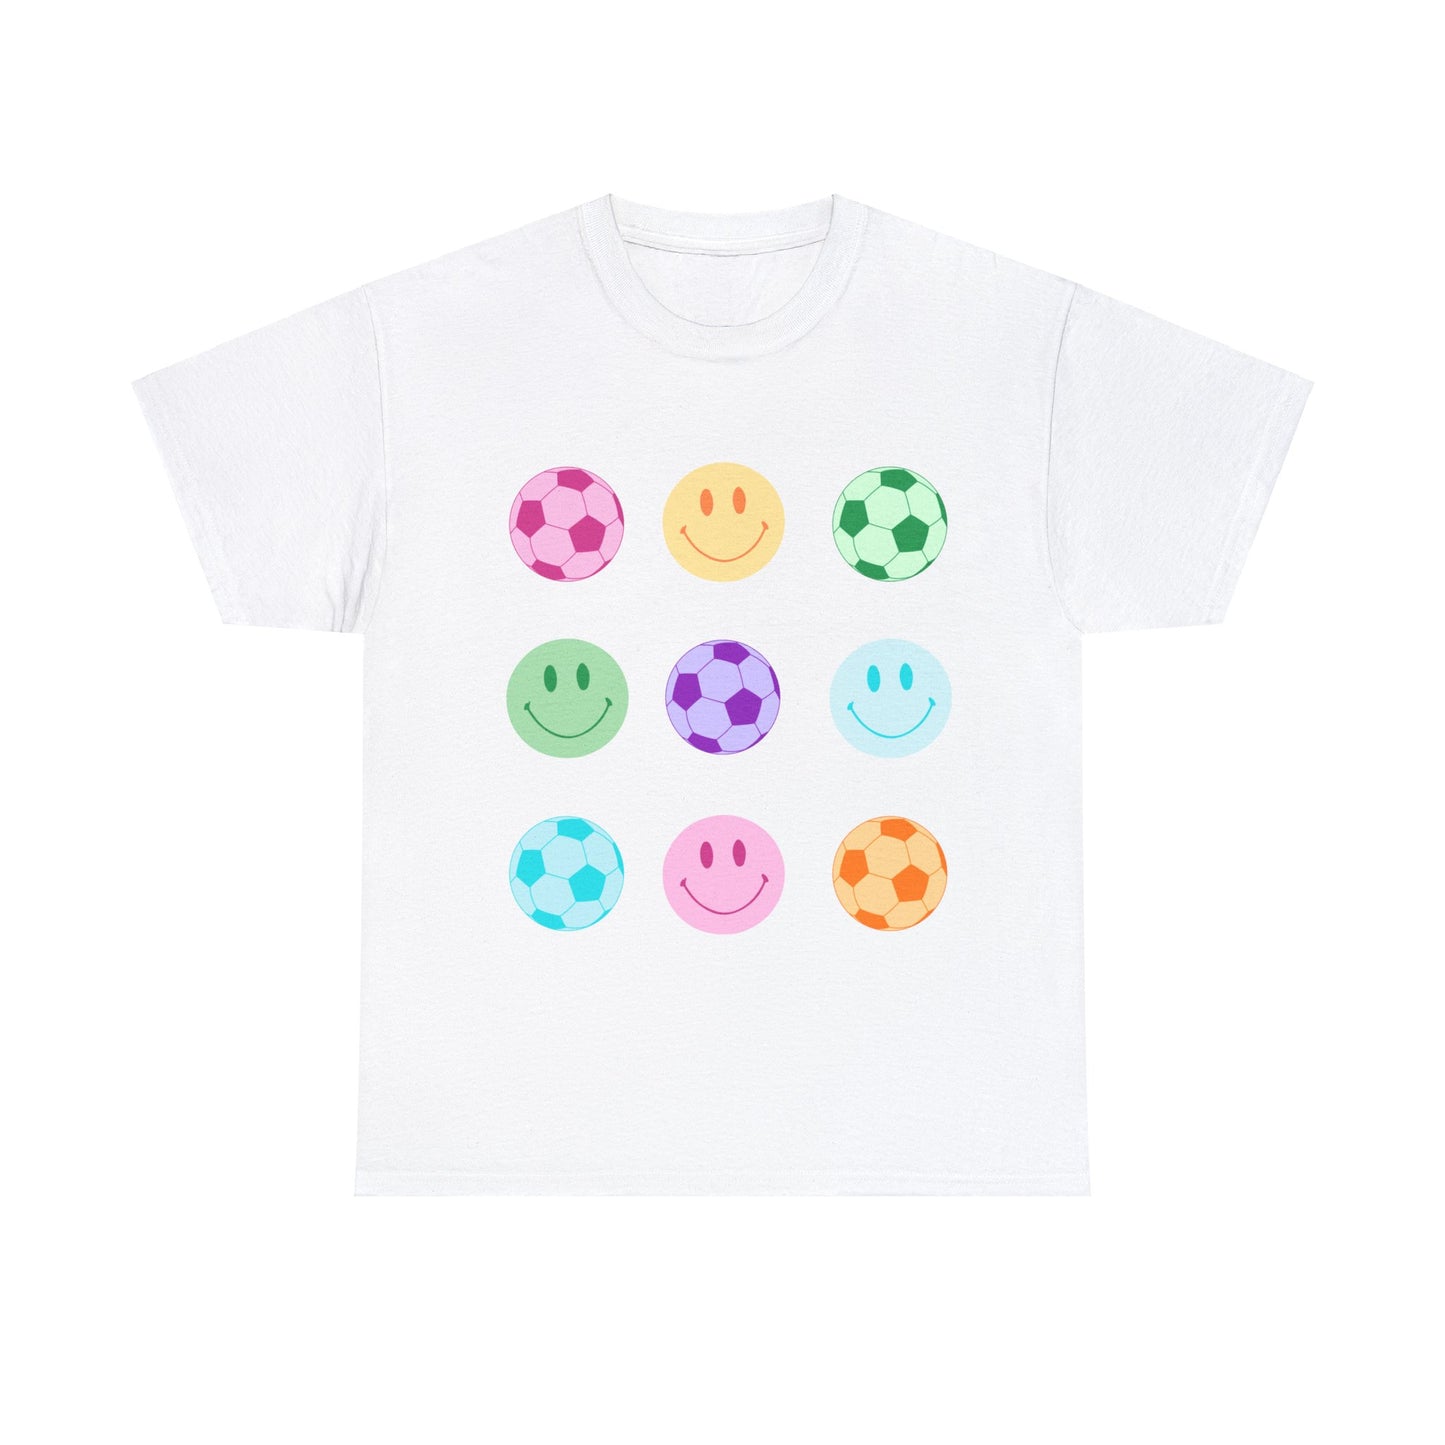 Soccer and Smiley Tee